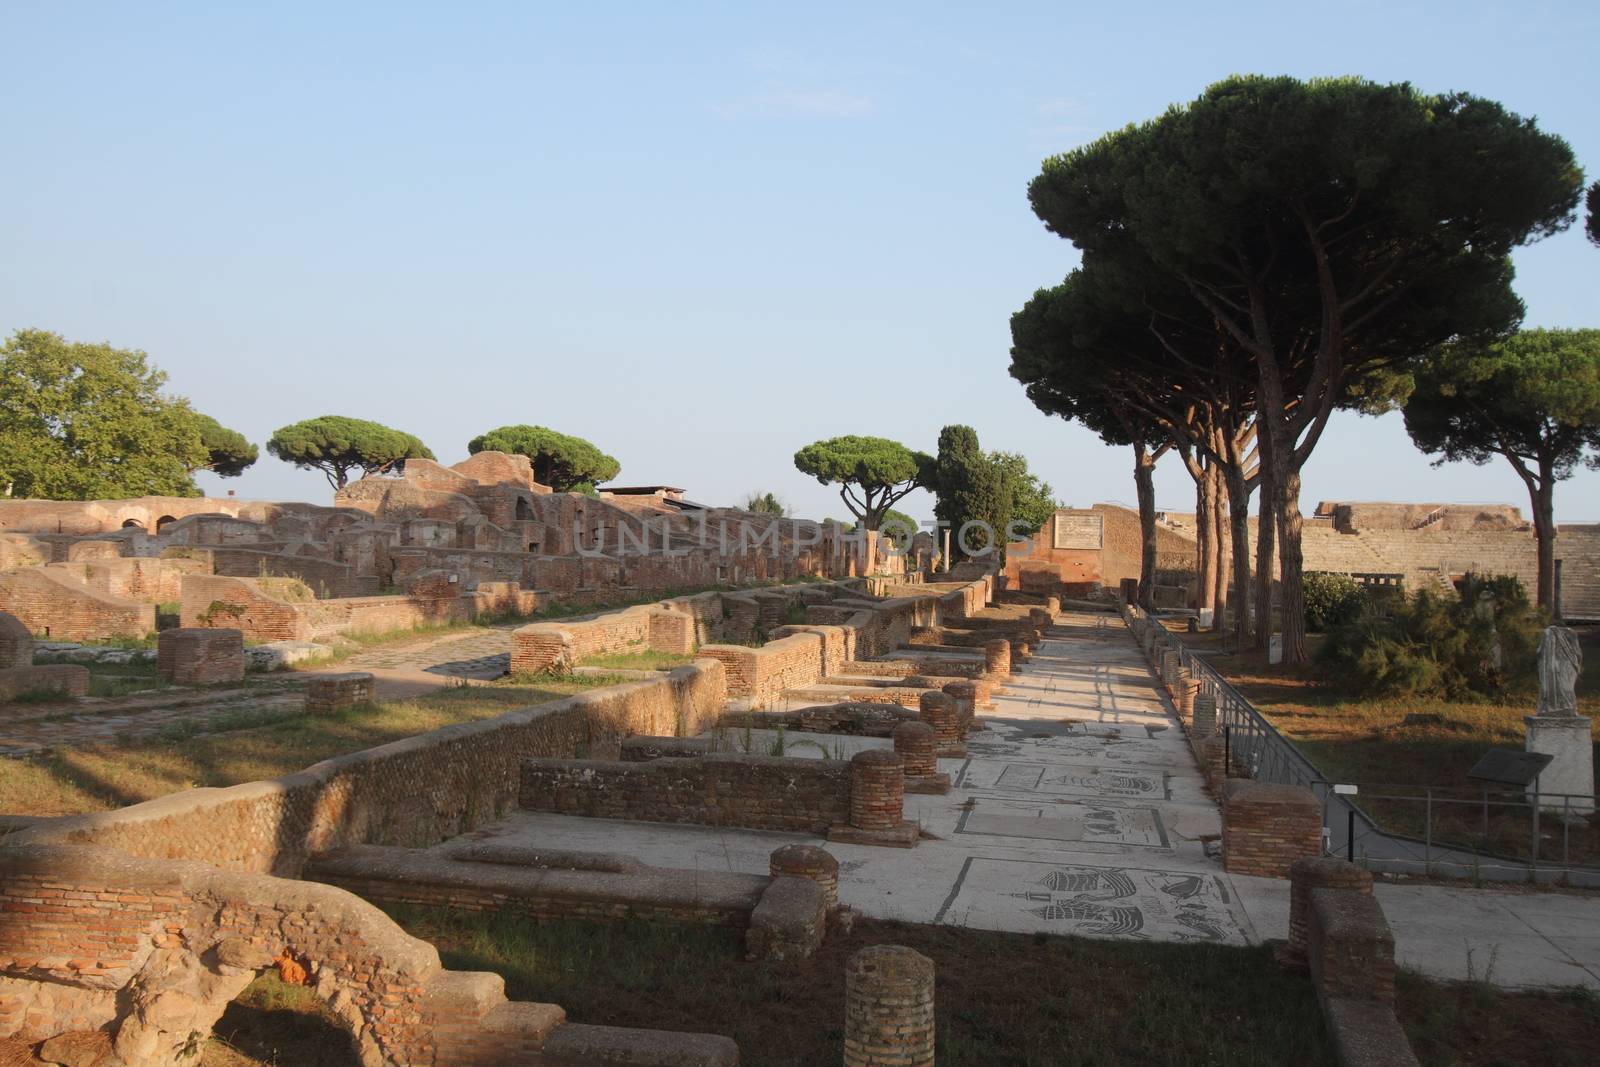 Rome, Italy - August 25, 2019: The archaeological site of Ostia Antica